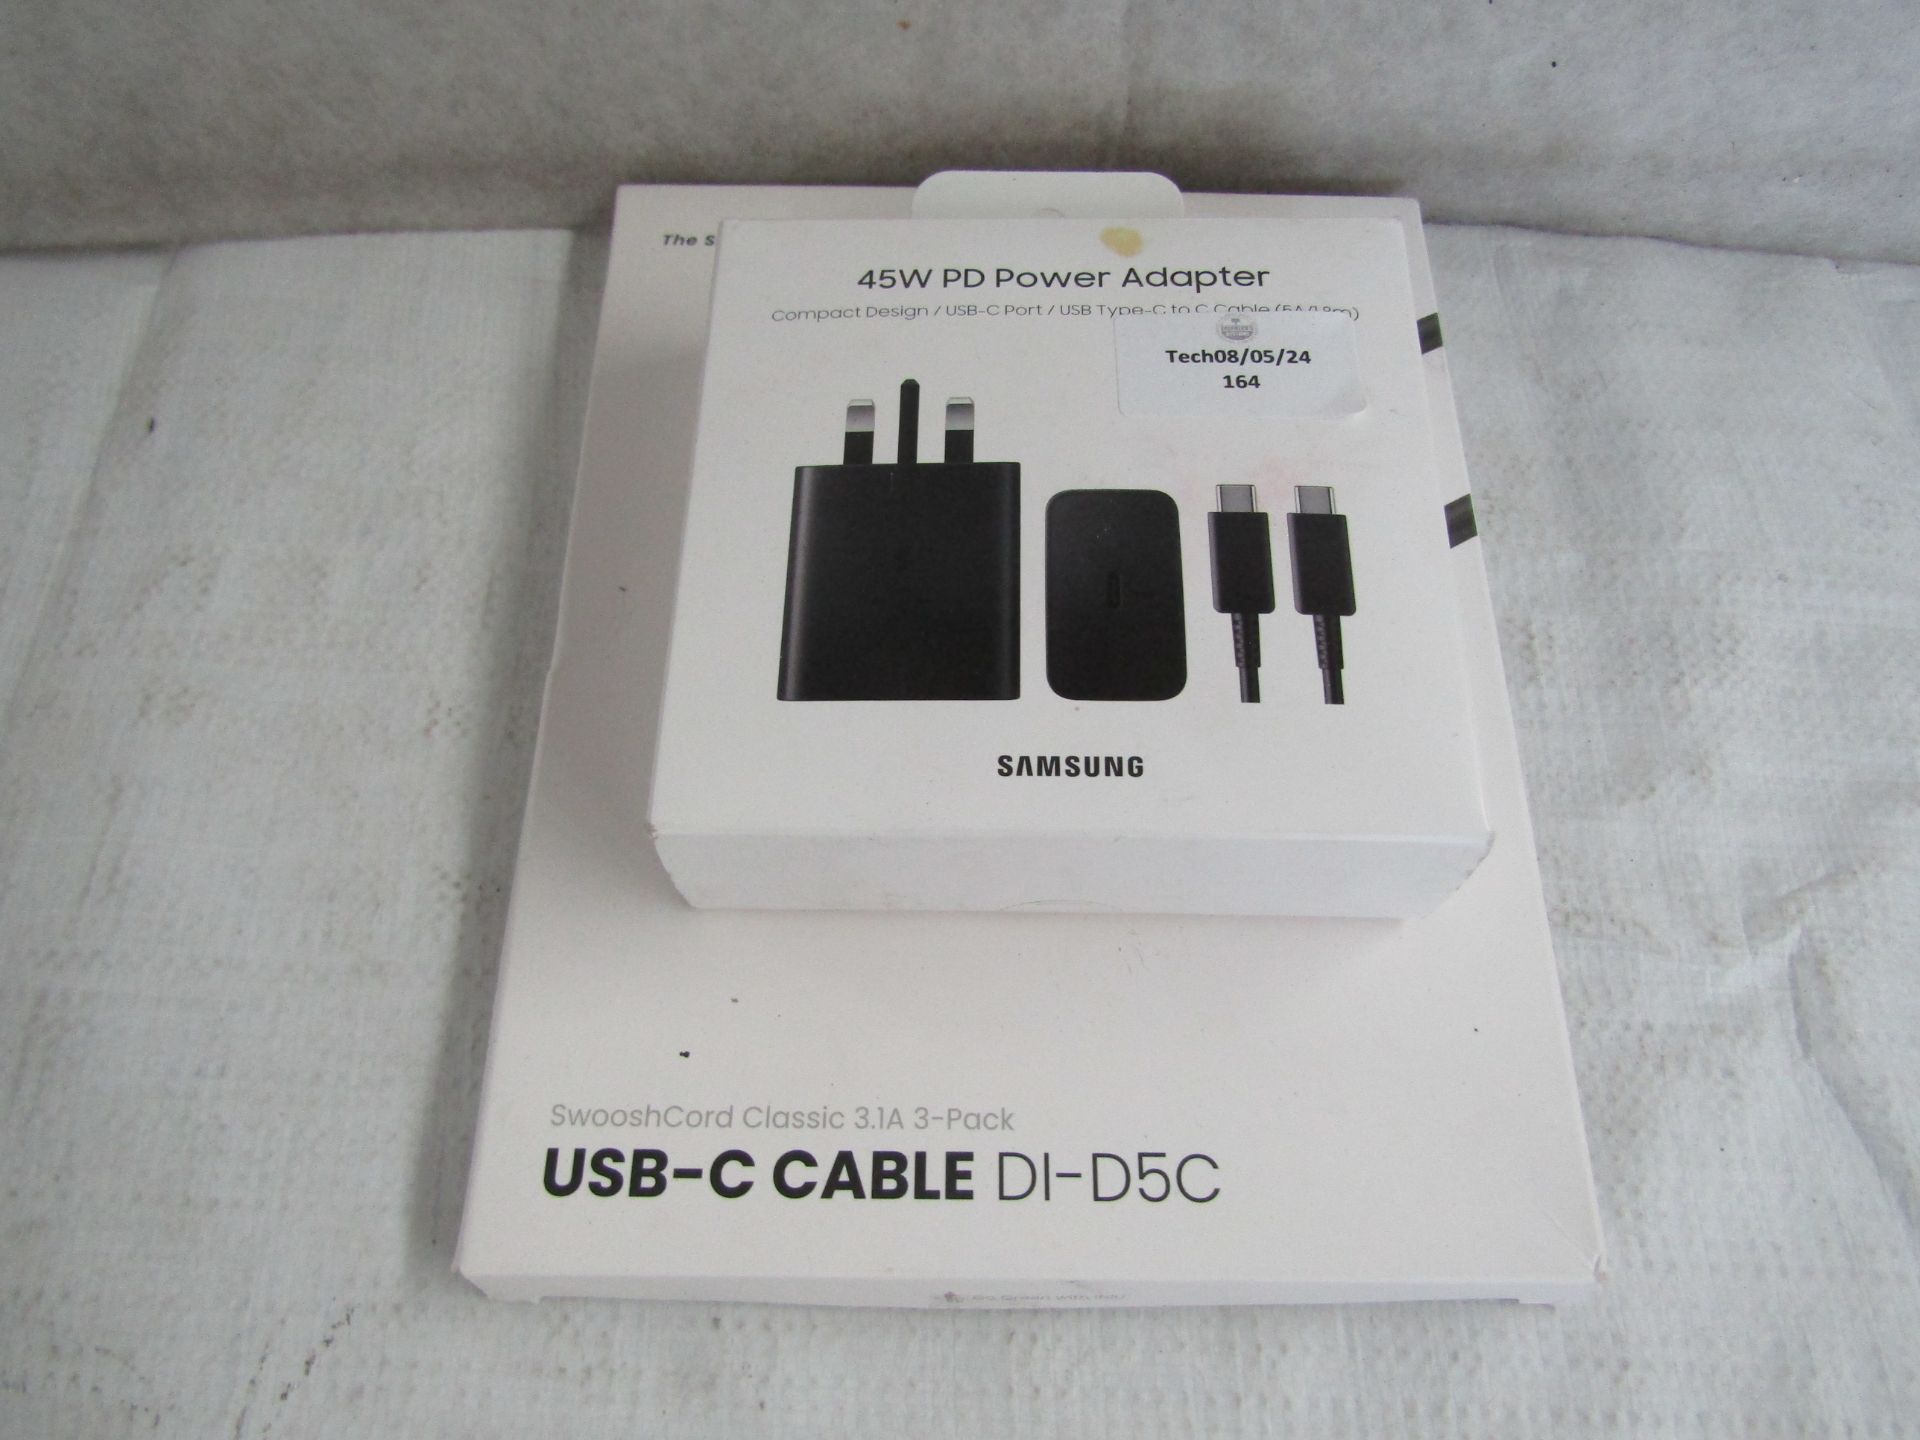 2x Items Being - 1x Iniu USB-C Cable DI-D5C - 1x Samsung PD Power Adapter USB-C Port - Both